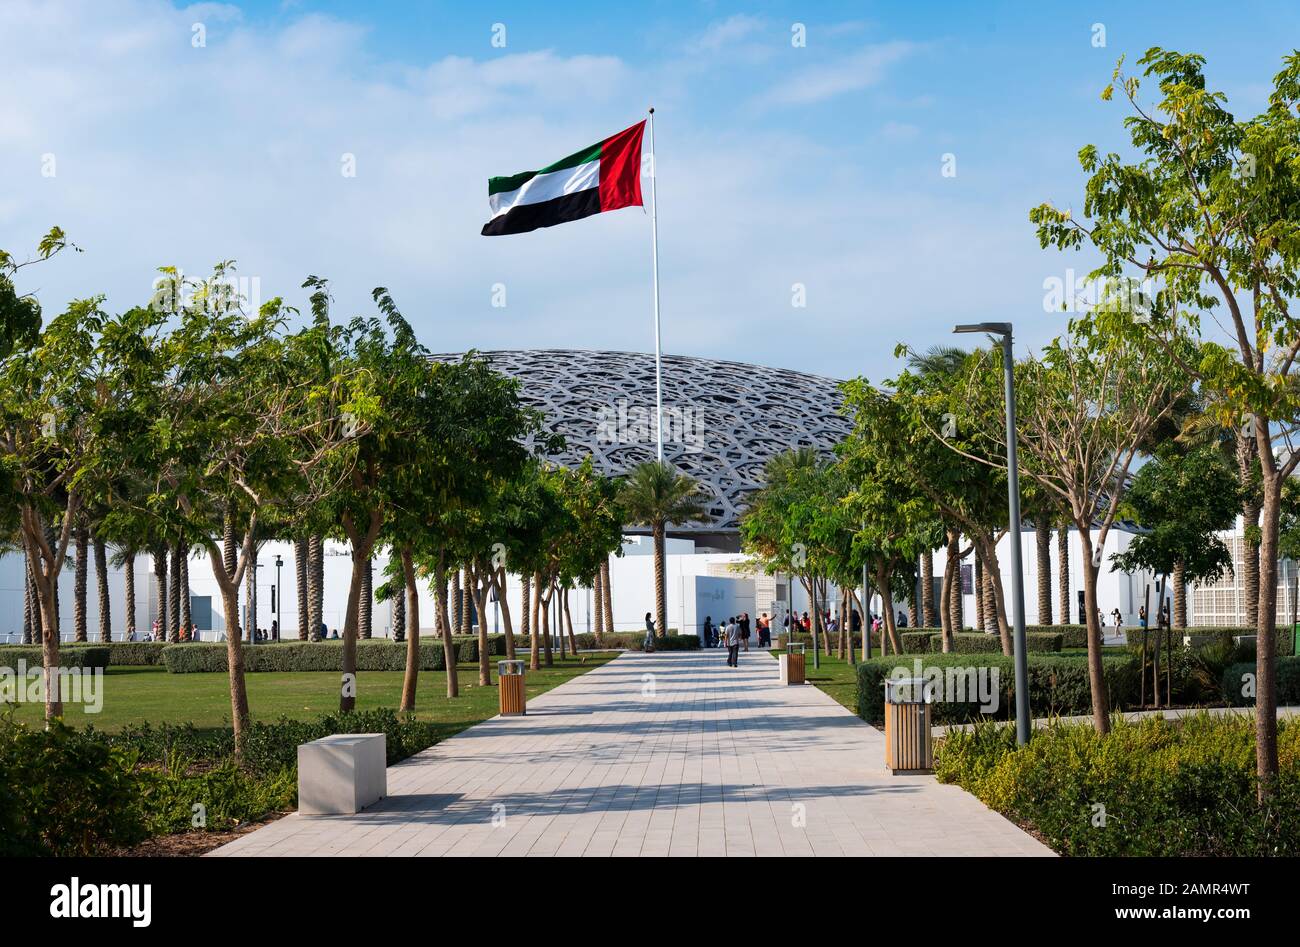 Abu Dhabi, United Arab Emirates - December 20, 2019: Louvre museum in Abu Dhabi exterior and entrance with characteristic architecture on a sunny day Stock Photo